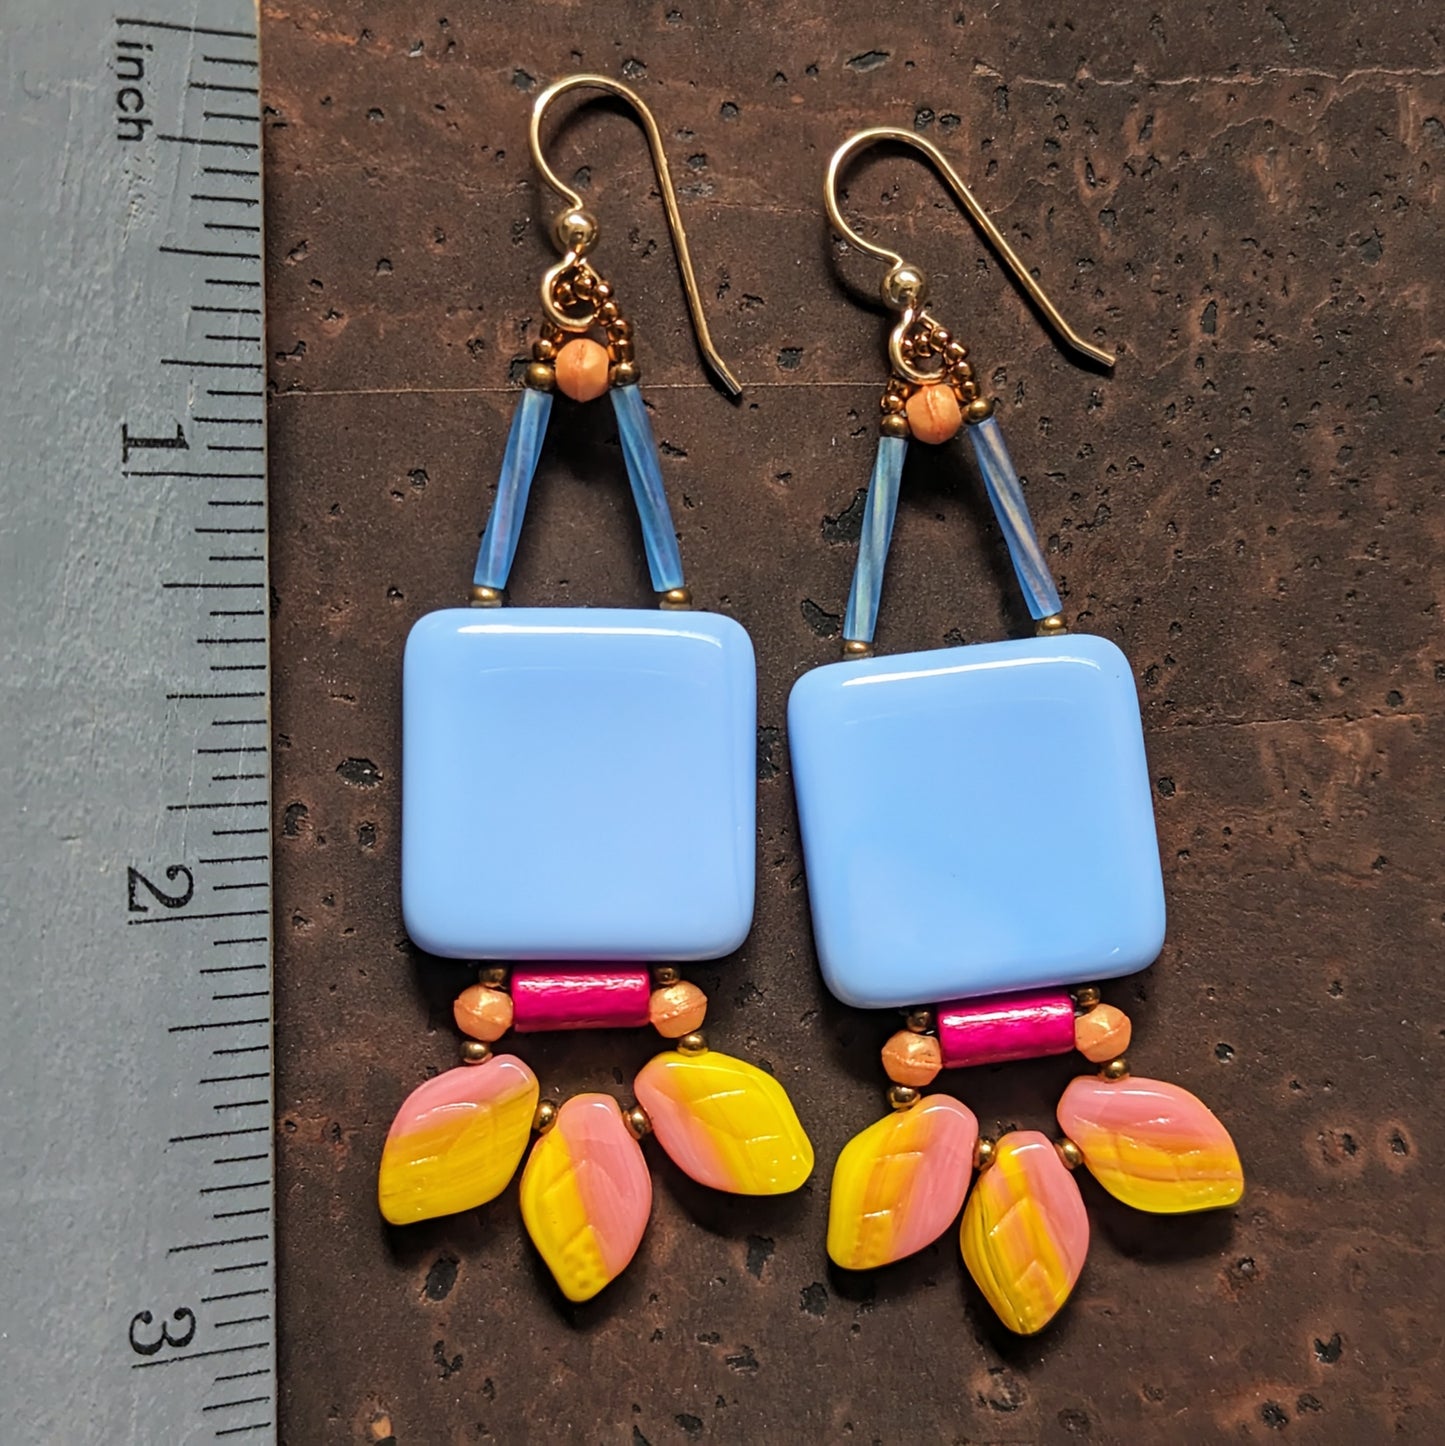 A pair of earrings lay on a dark brown cork background next to a ruler showing three inches as the length. The earrings are have a large light blueish square suspended from gold wires. Below the square is a horizontal bright pink tube with apricot beads on either side. At the bottom is a swag of three leaf shaped beads made from variegated yellow and pastel pink glass.